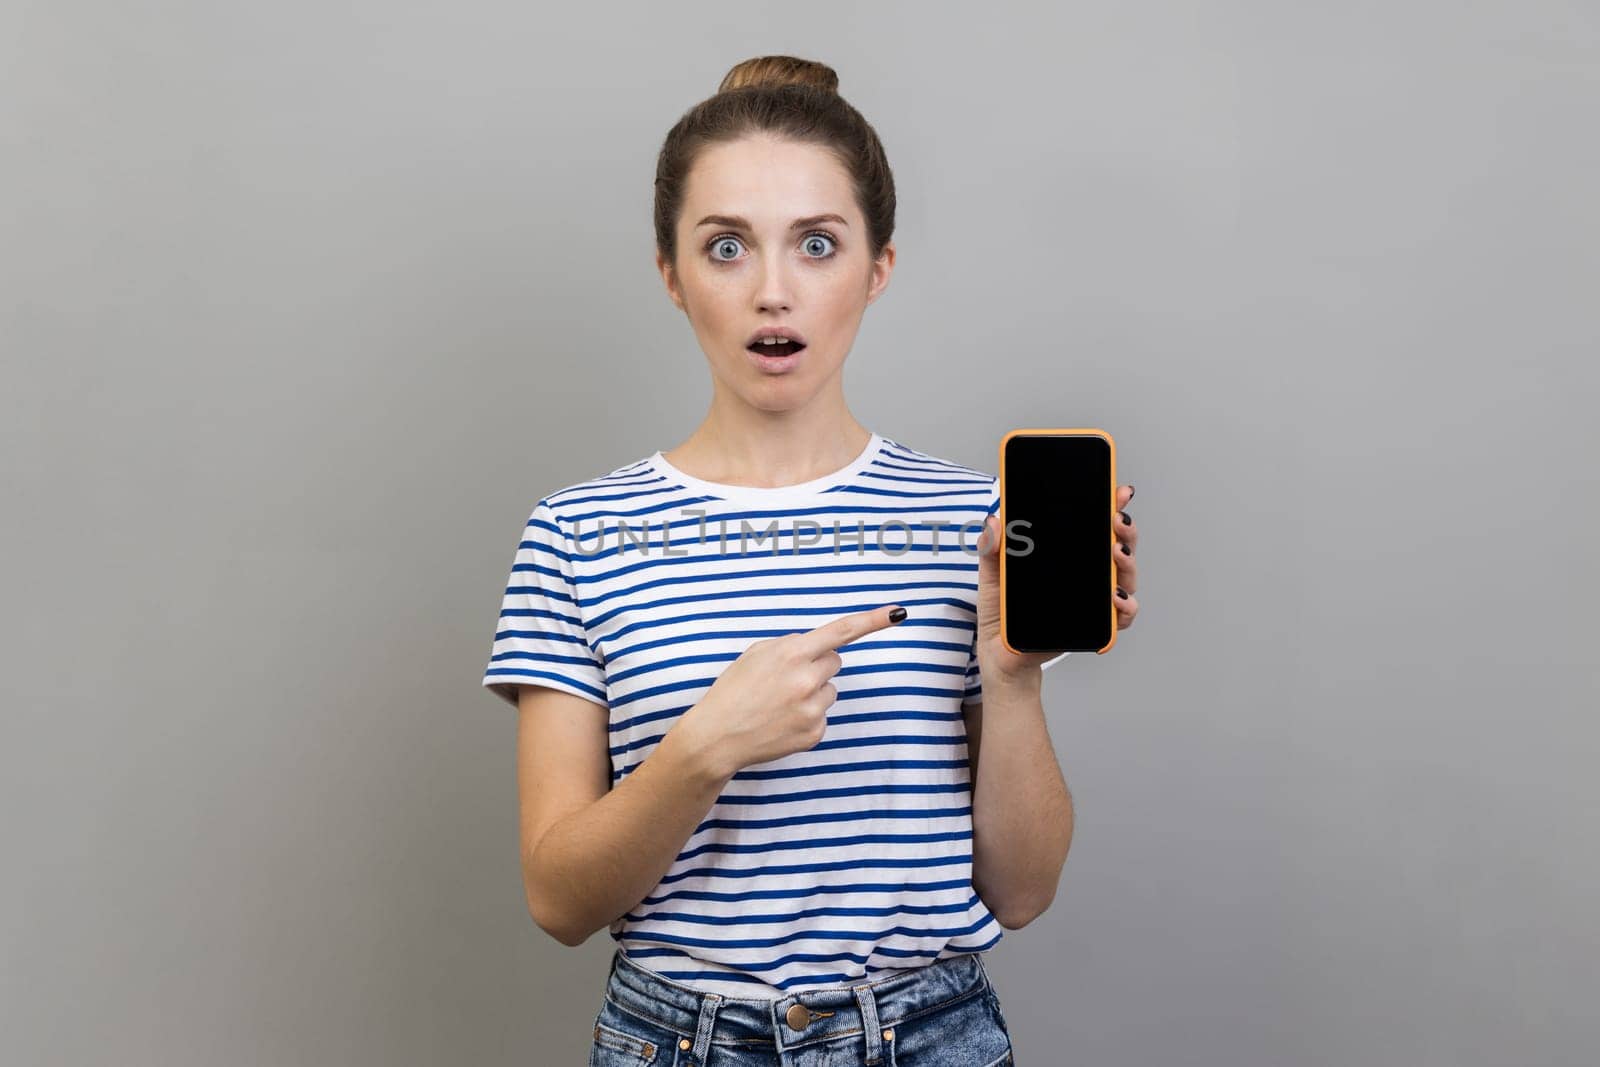 New mobile app. Portrait of woman wearing striped T-shirt pointing at cell phone and looking with surprised expression, shocked by mobile tariffs. Indoor studio shot isolated on gray background.